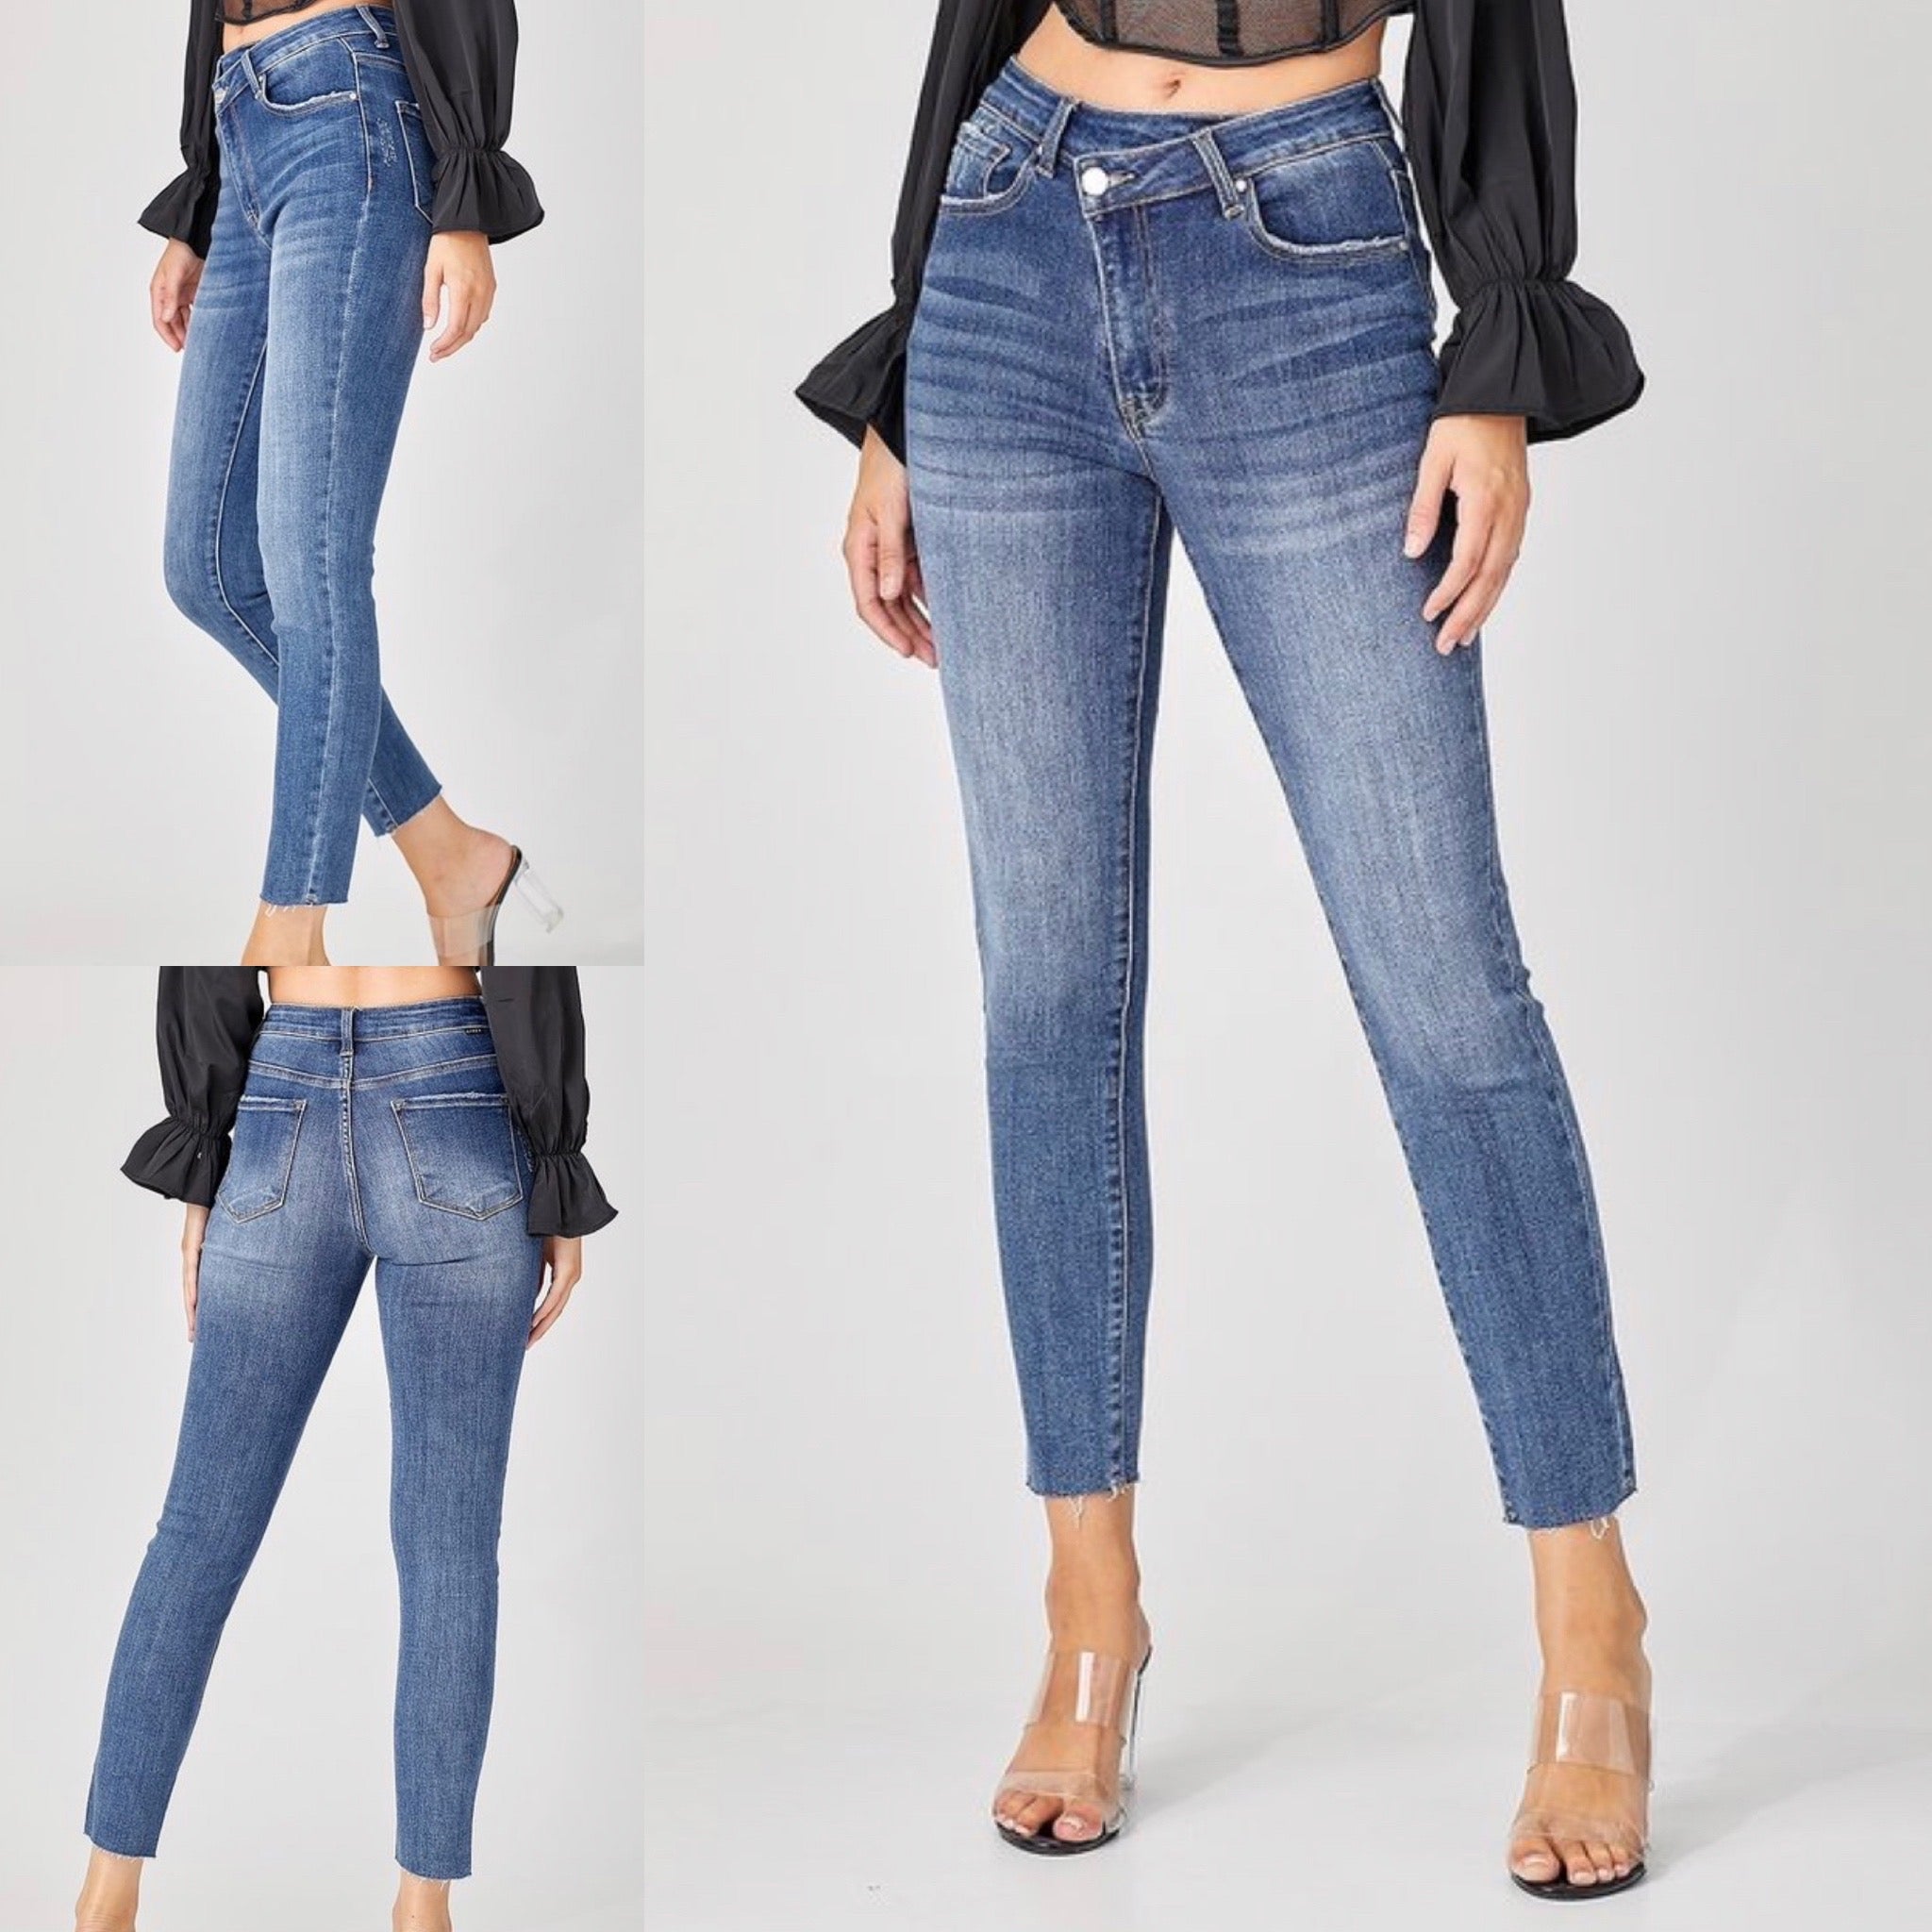 Charming Crossover High Rise Skinny Risen Jeans